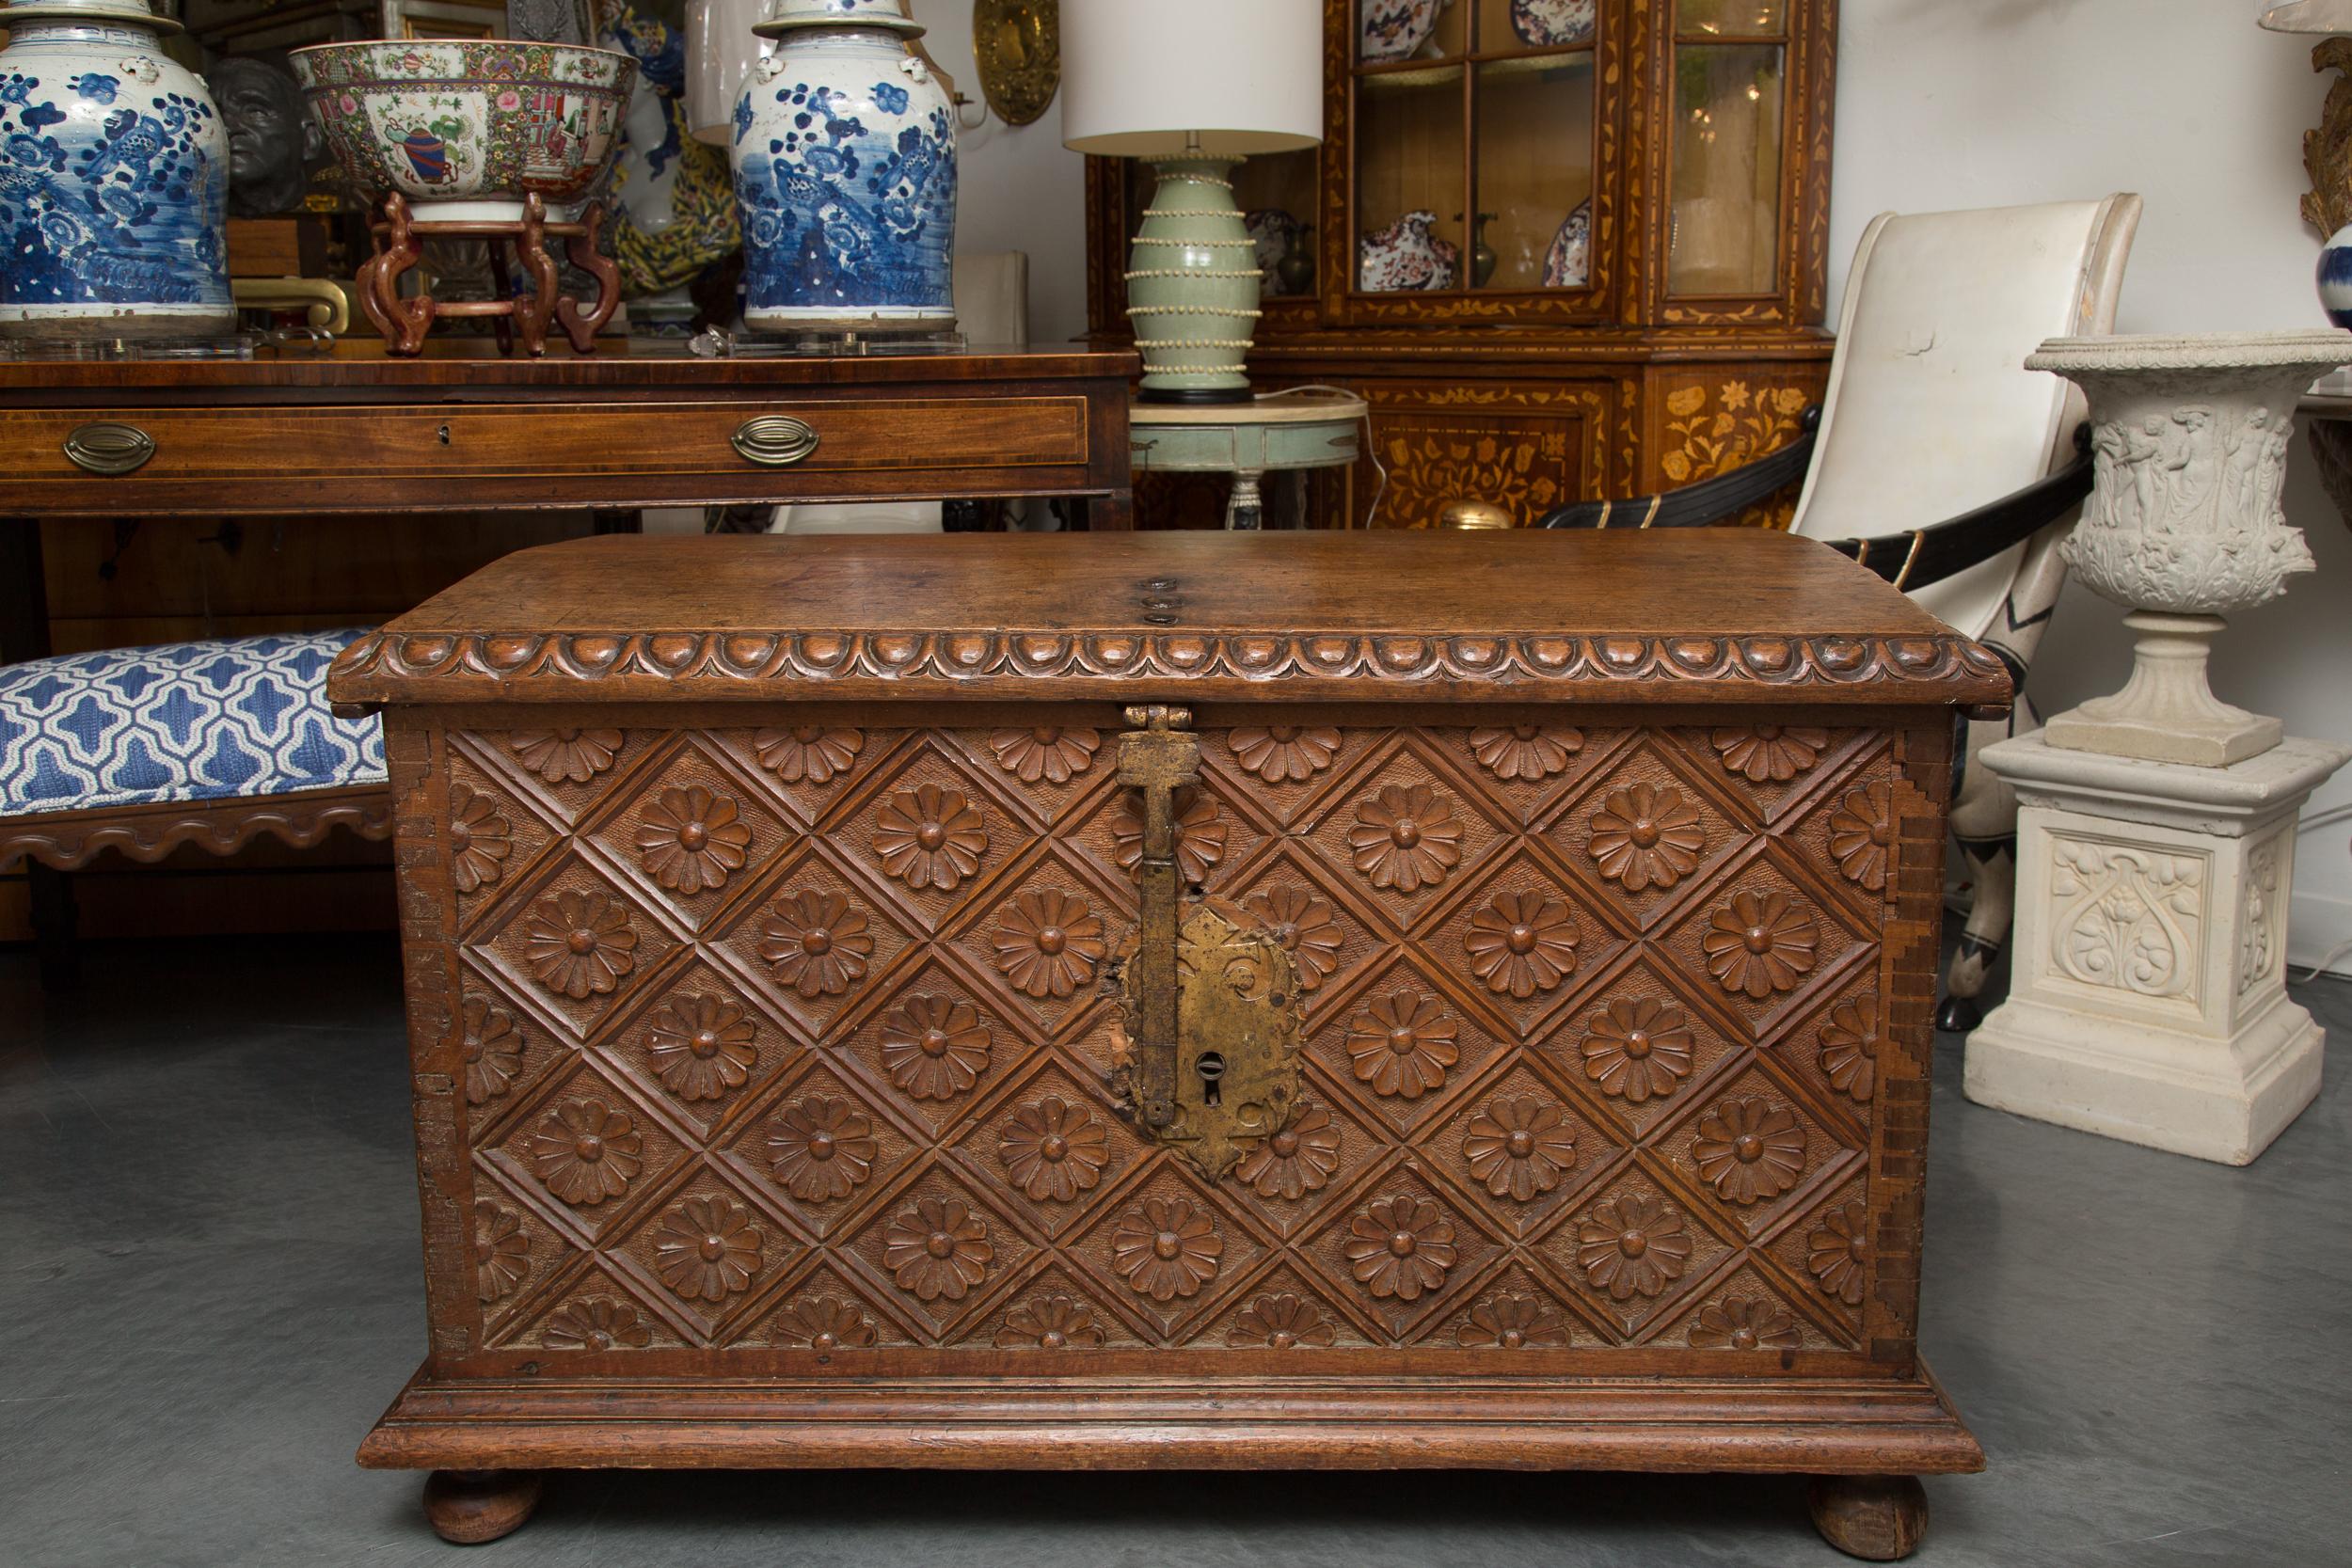 This is a northern Spain walnut blanket chest artfully carved over all with flower heads. The slightly arched top has an ogee edge with a carved motif reminiscent of an egg and dart design. The cassone is raised on small bun feet.